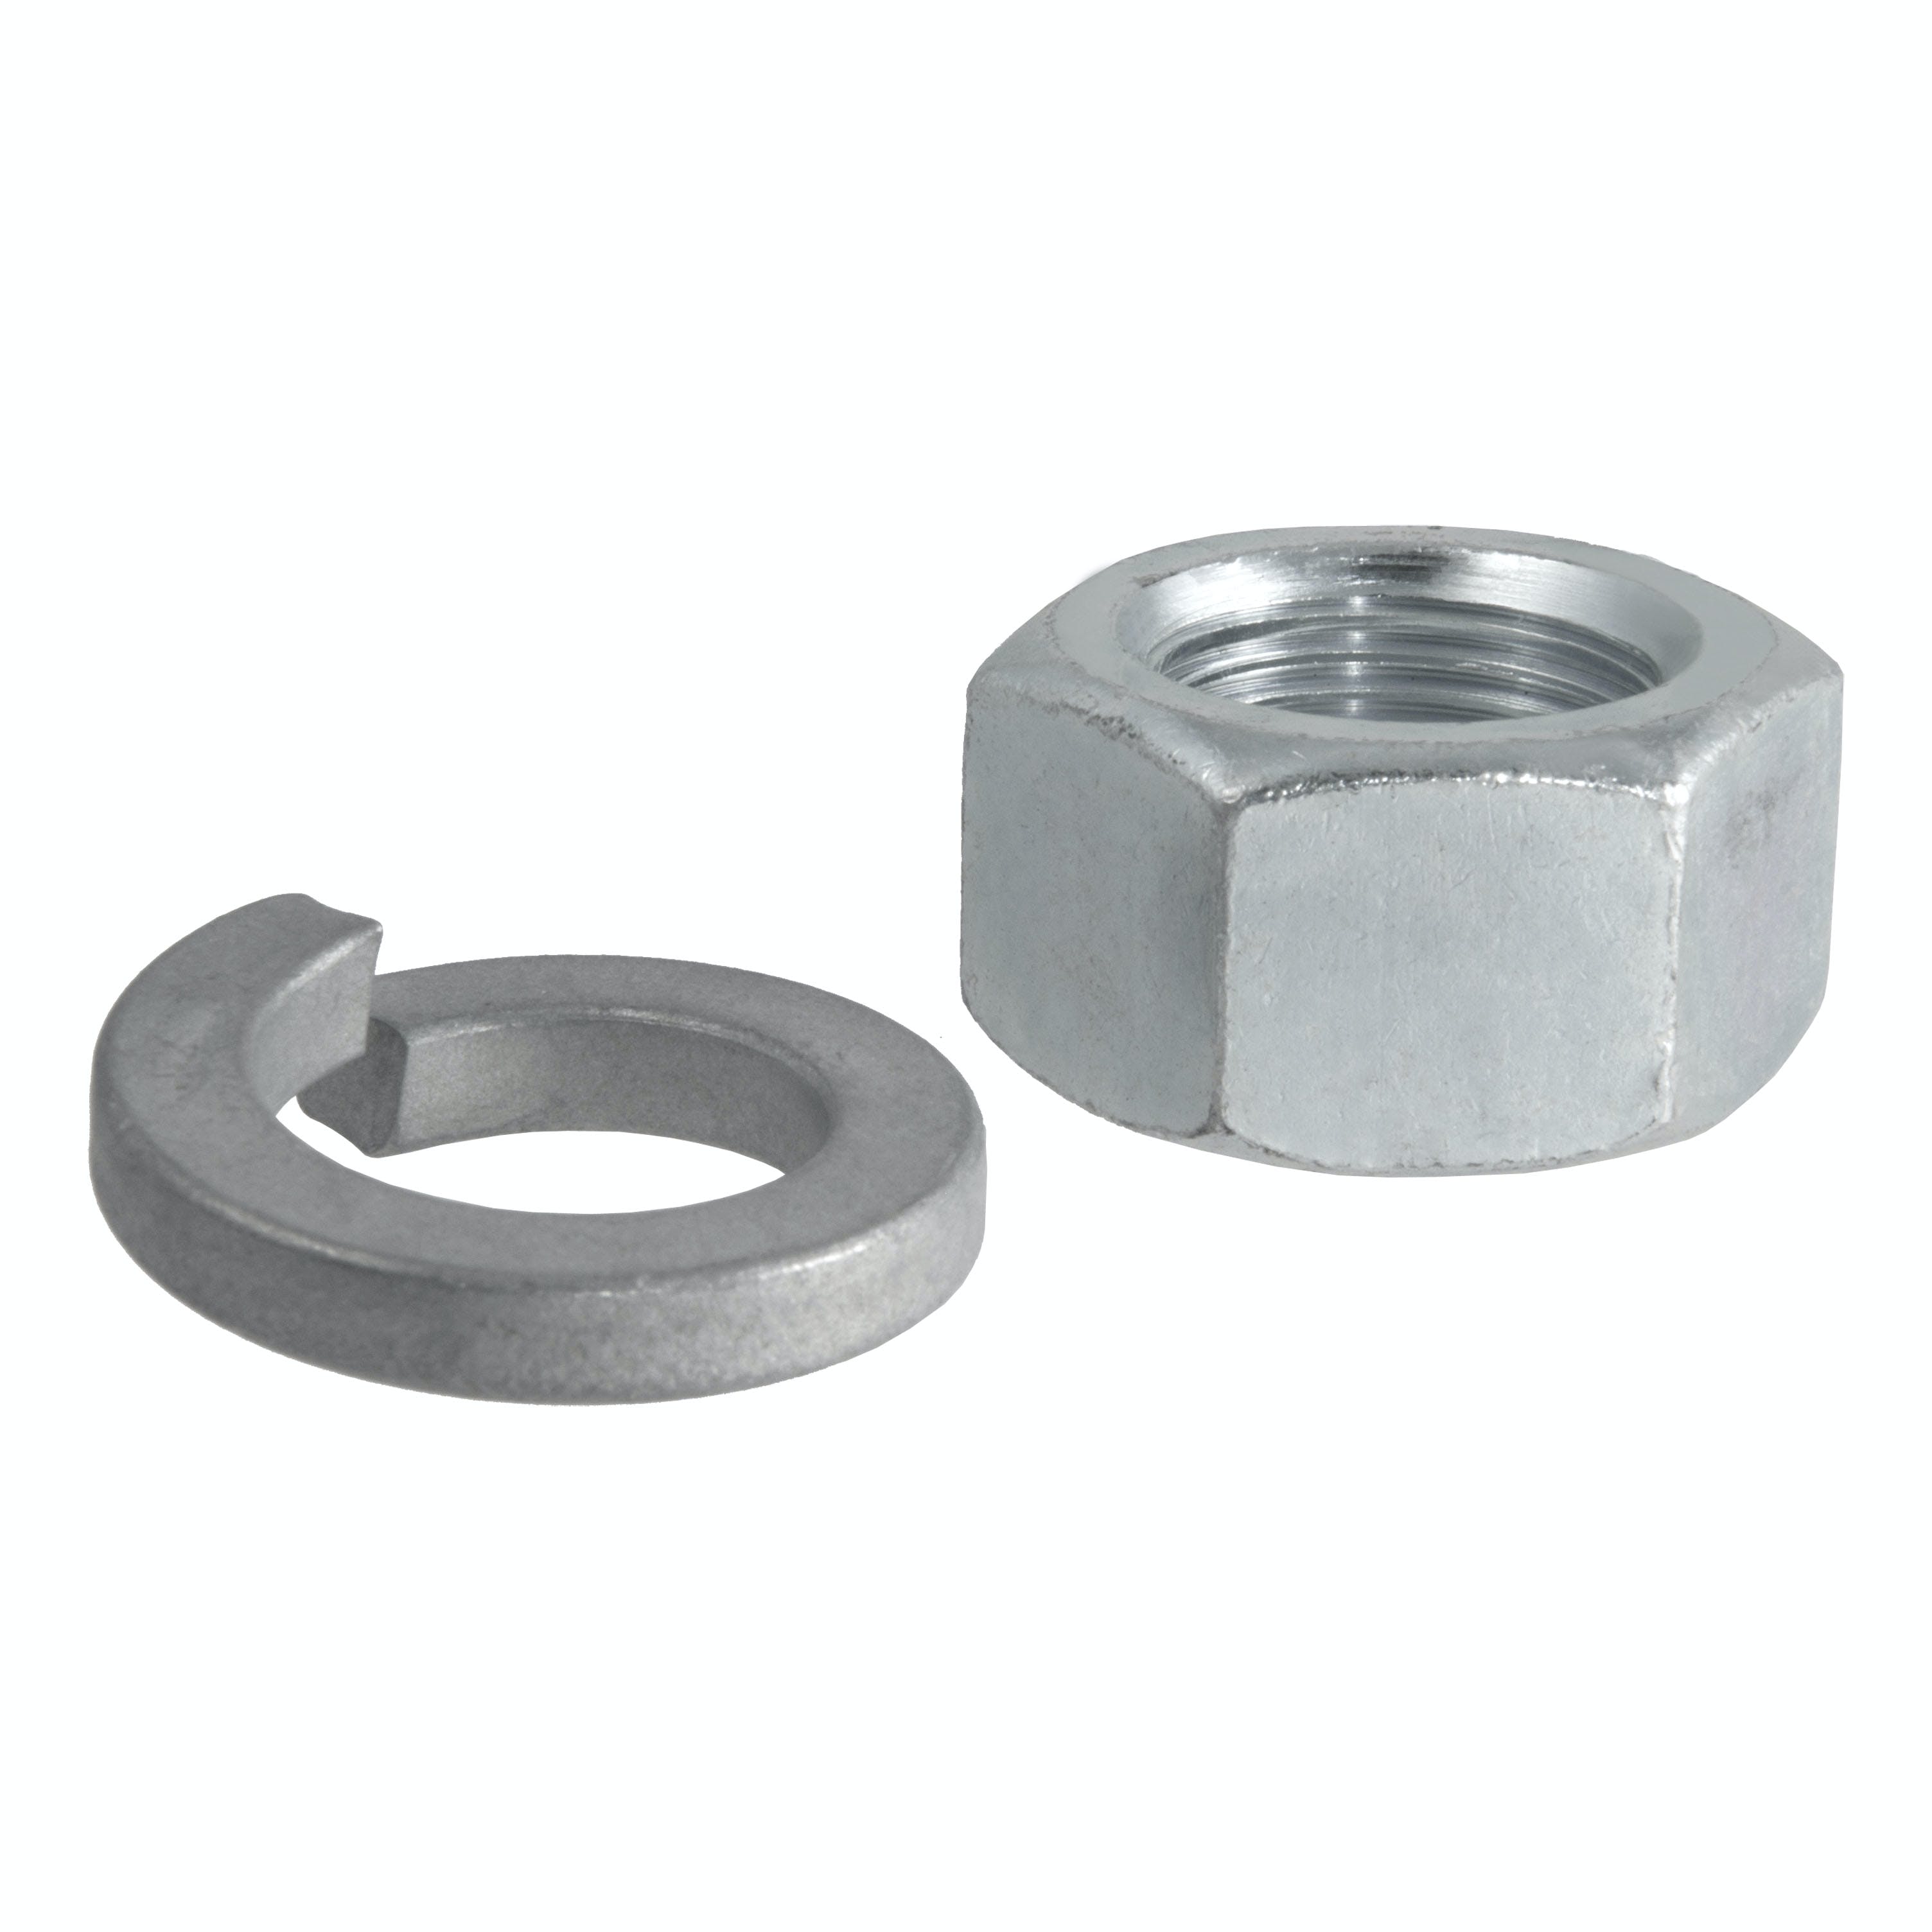 CURT 40104 Replacement Trailer Ball Nut and Washer for 1 Shank